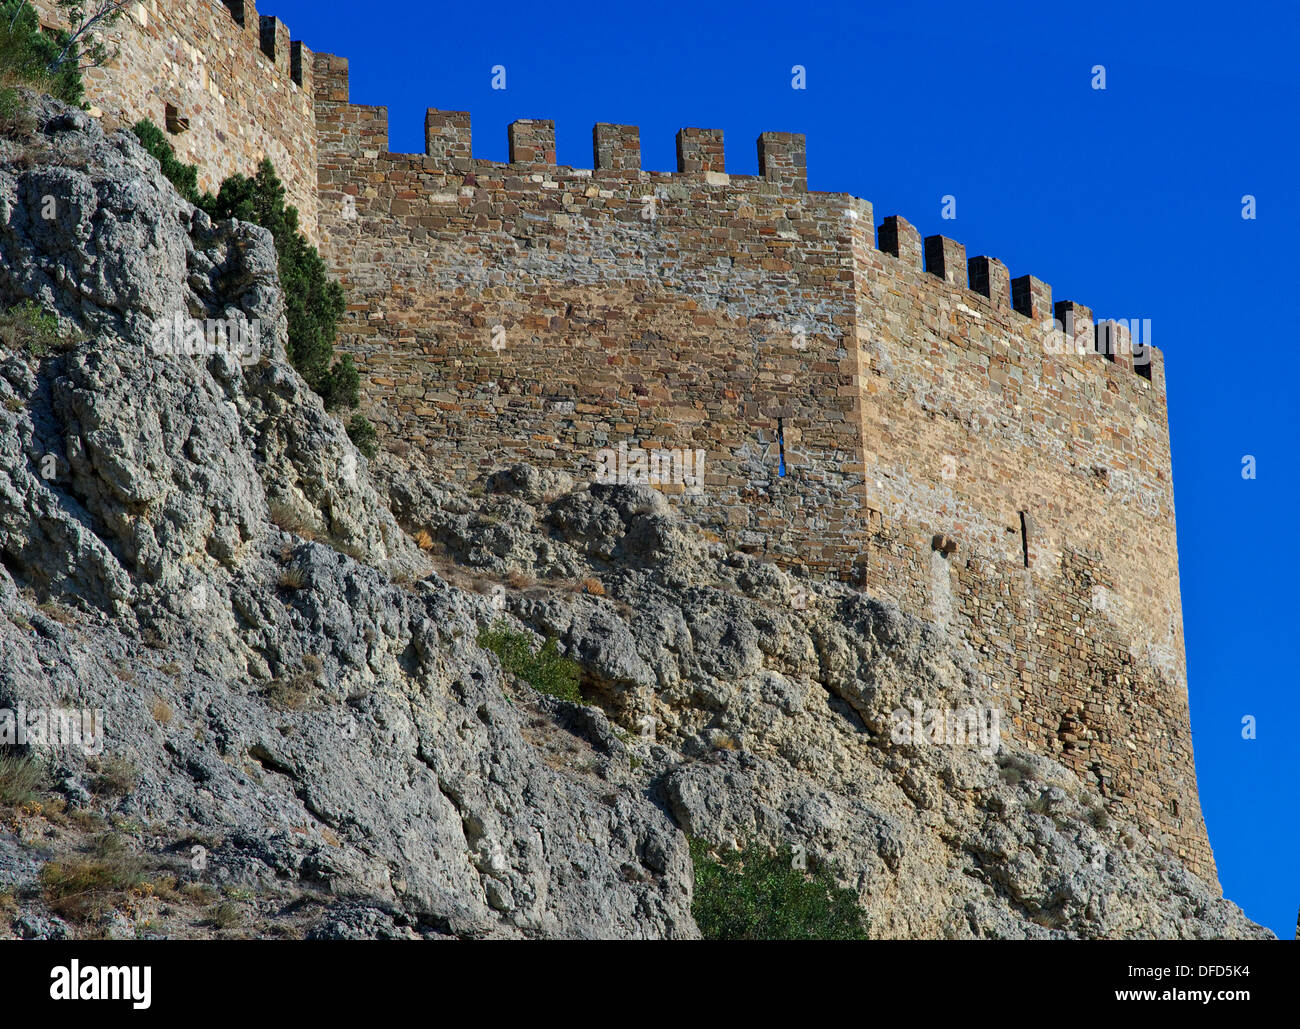 Ruins of an ancient Genoa Fortress on a mountain in Sudak, Crimea, Ukraine. Situated on rocky mountains with blue sky Stock Photo